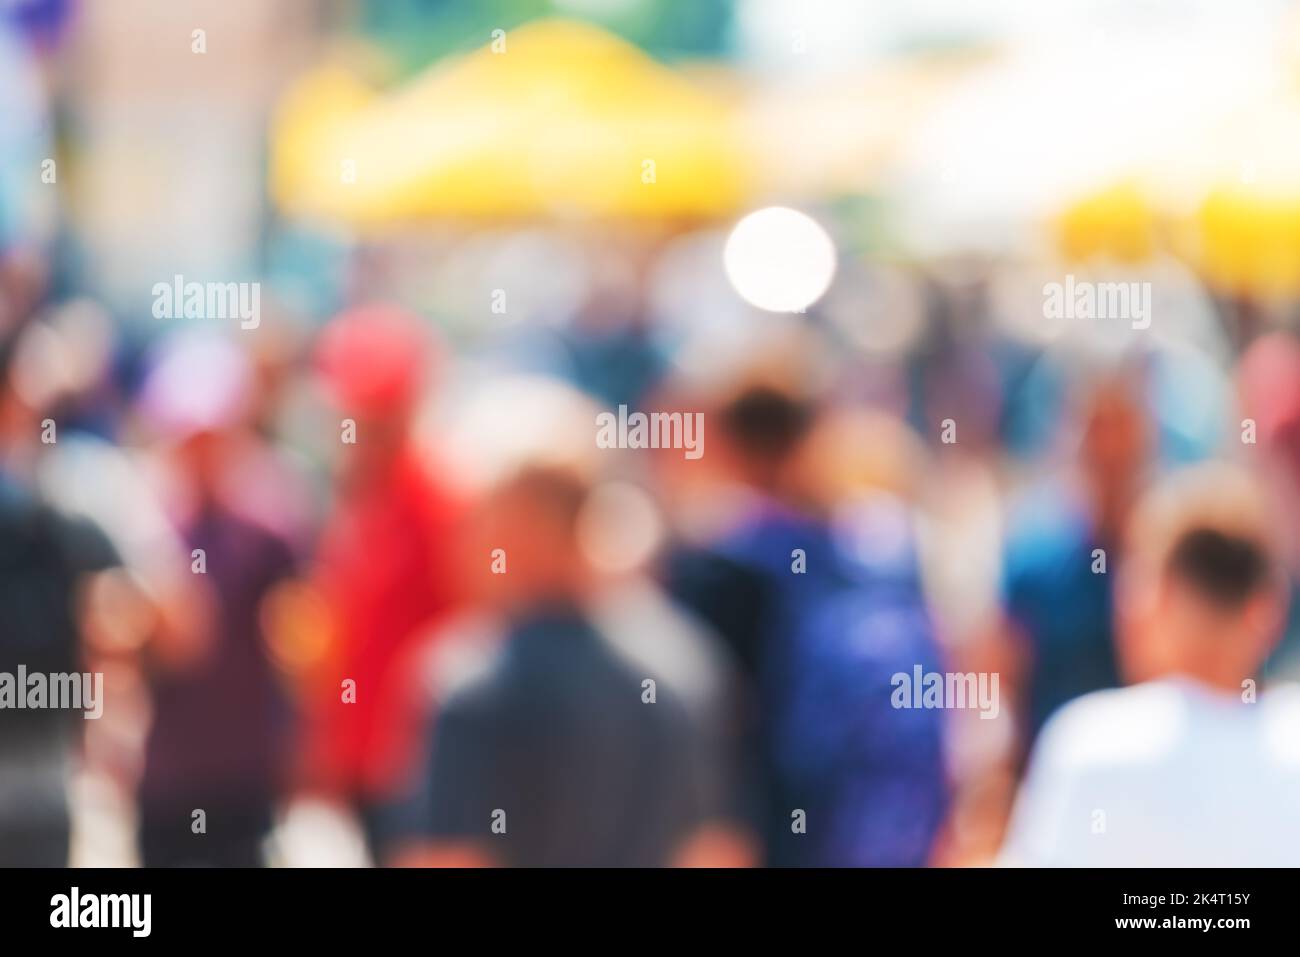 Community of people concept with blurred crowd on street, selective focus Stock Photo